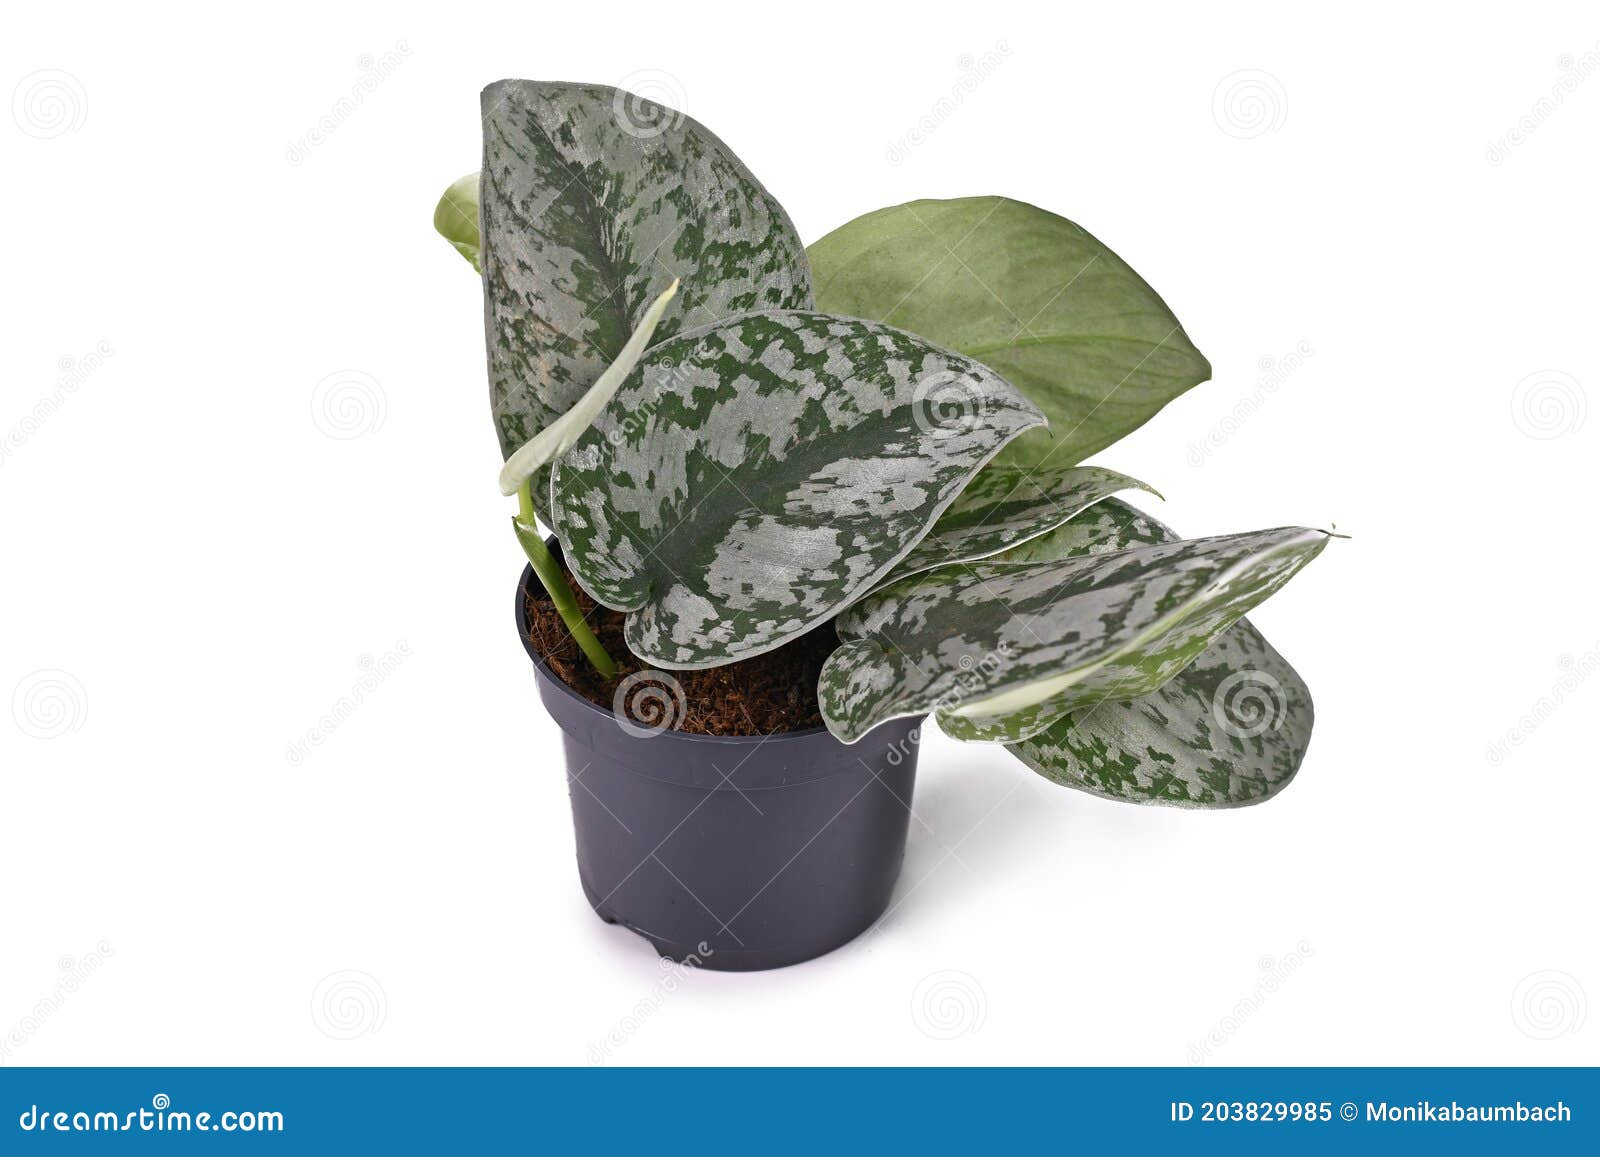 small exotic `scindapsus pictus exotica` or `satin pothos` houseplant with large leaves with velvet texture and silver spots